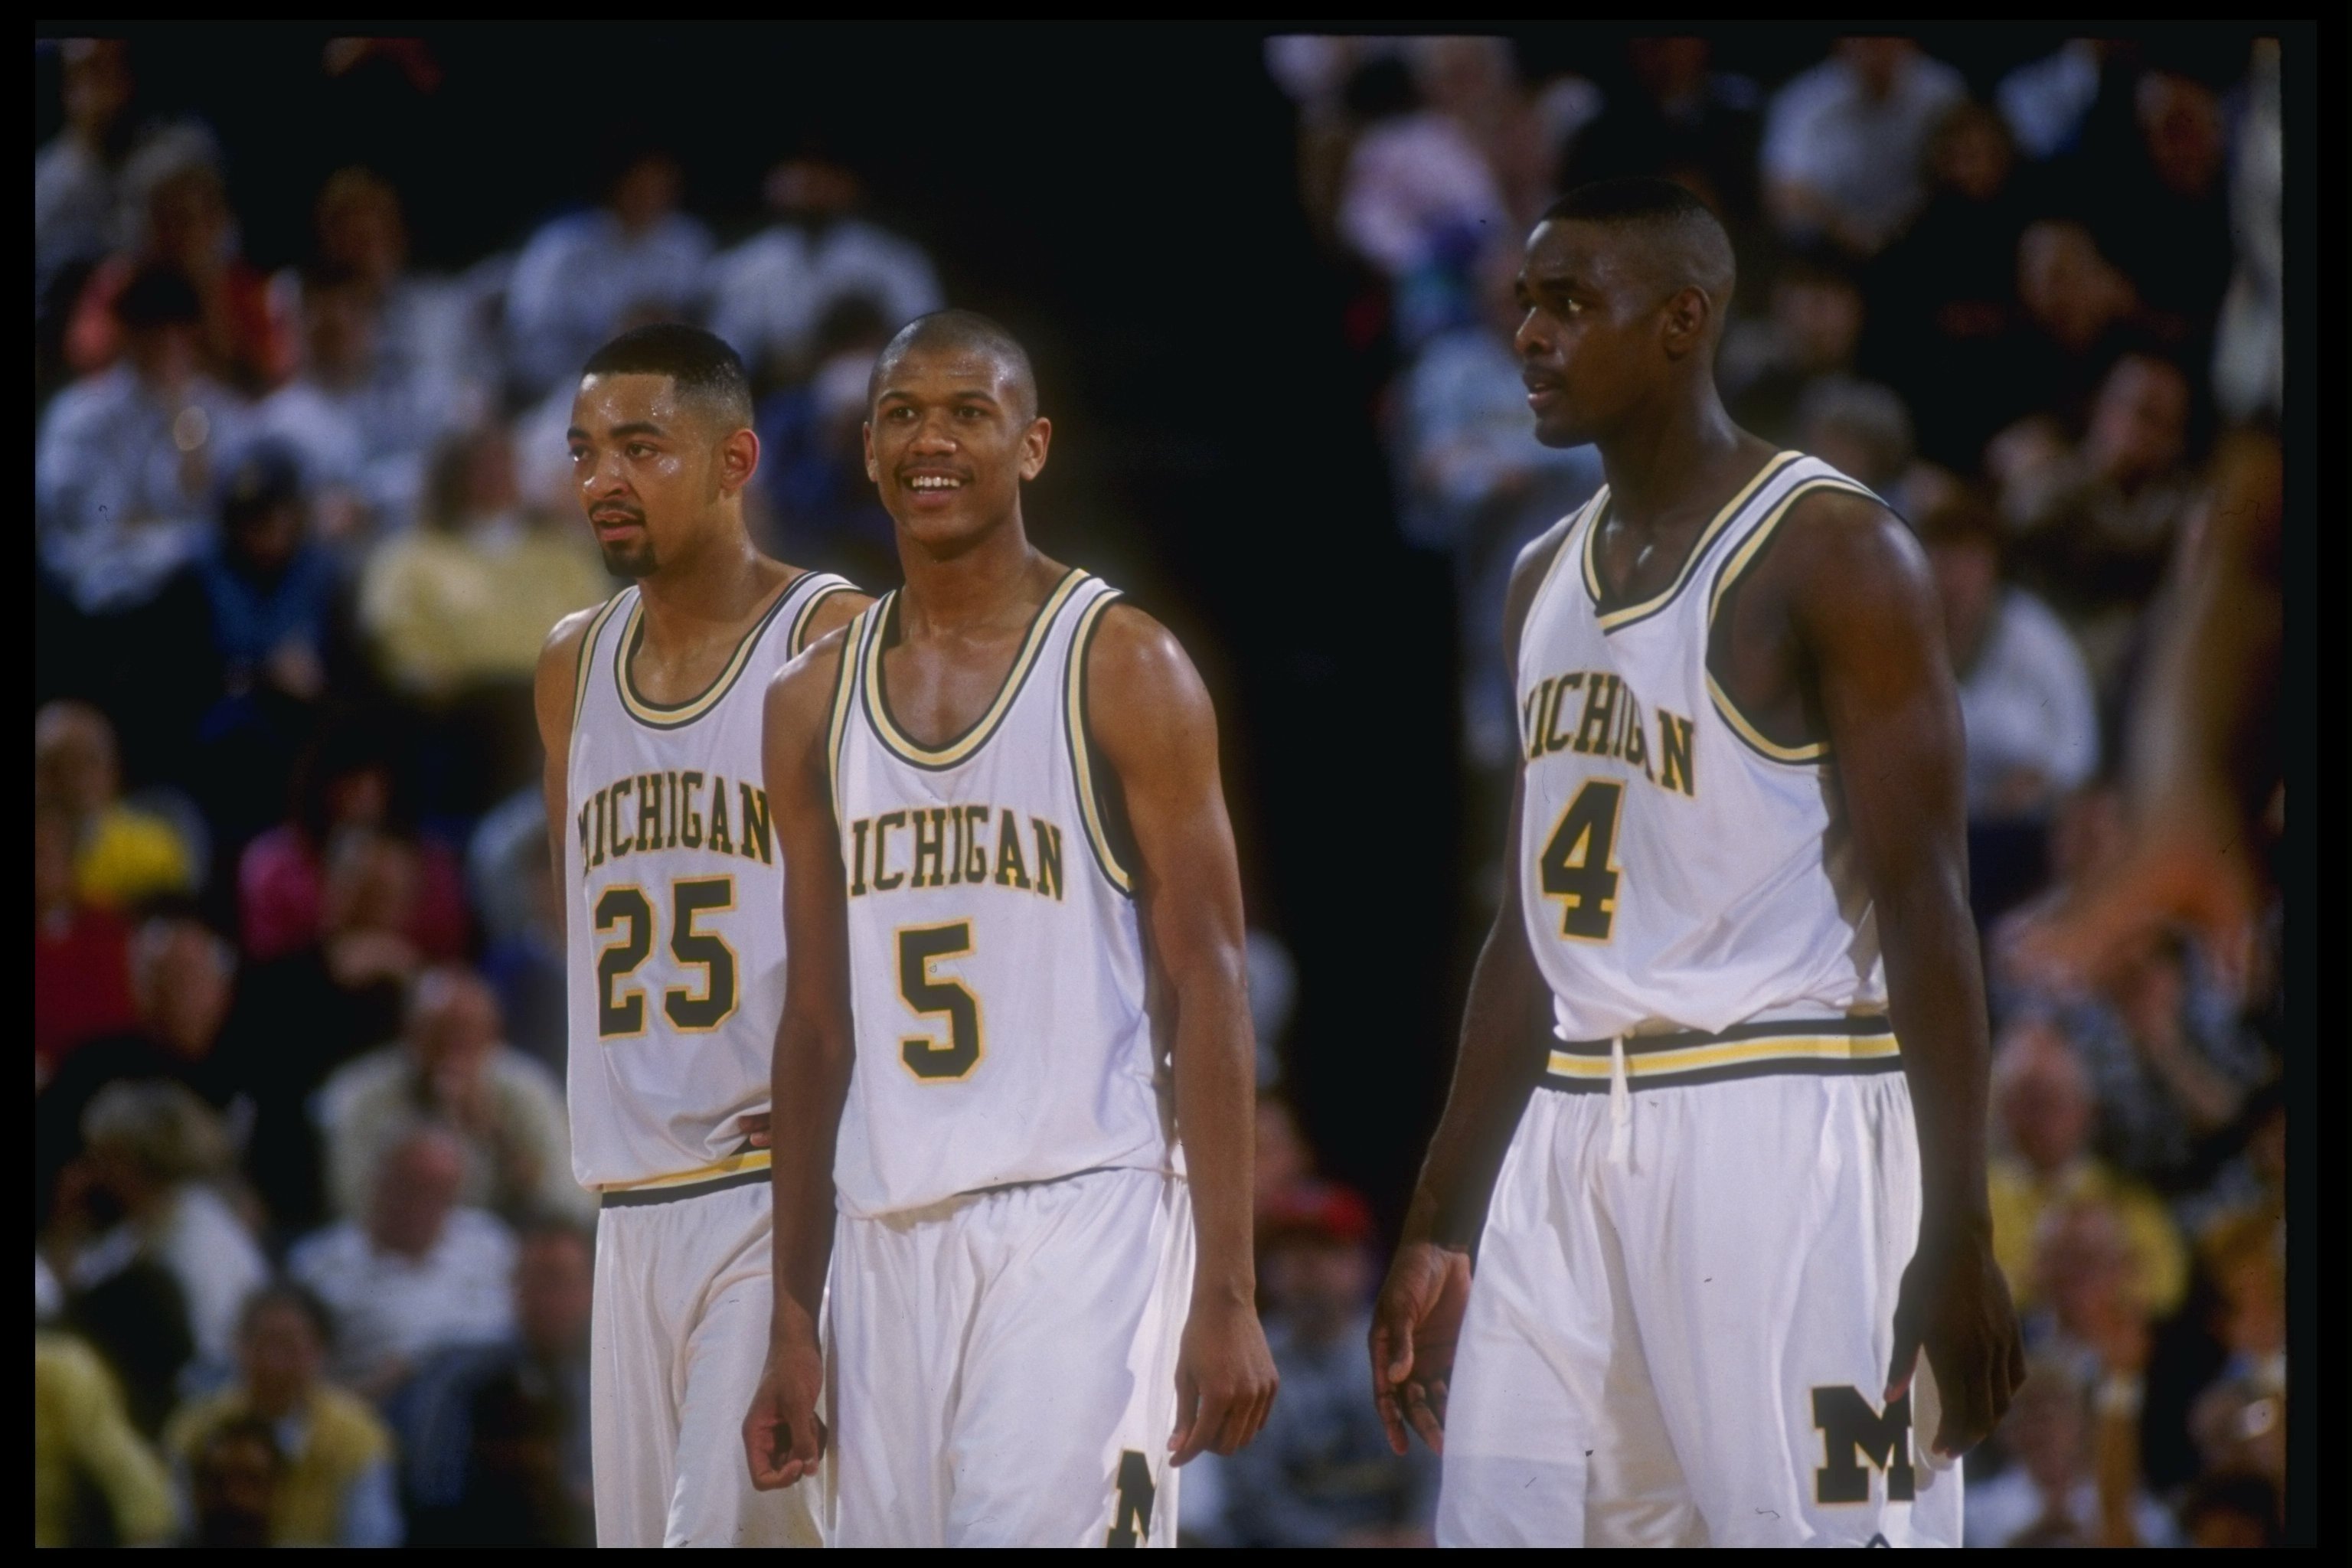 Michigan Fans Wish That Chris Webber and Jalen Rose Would Just Get Along